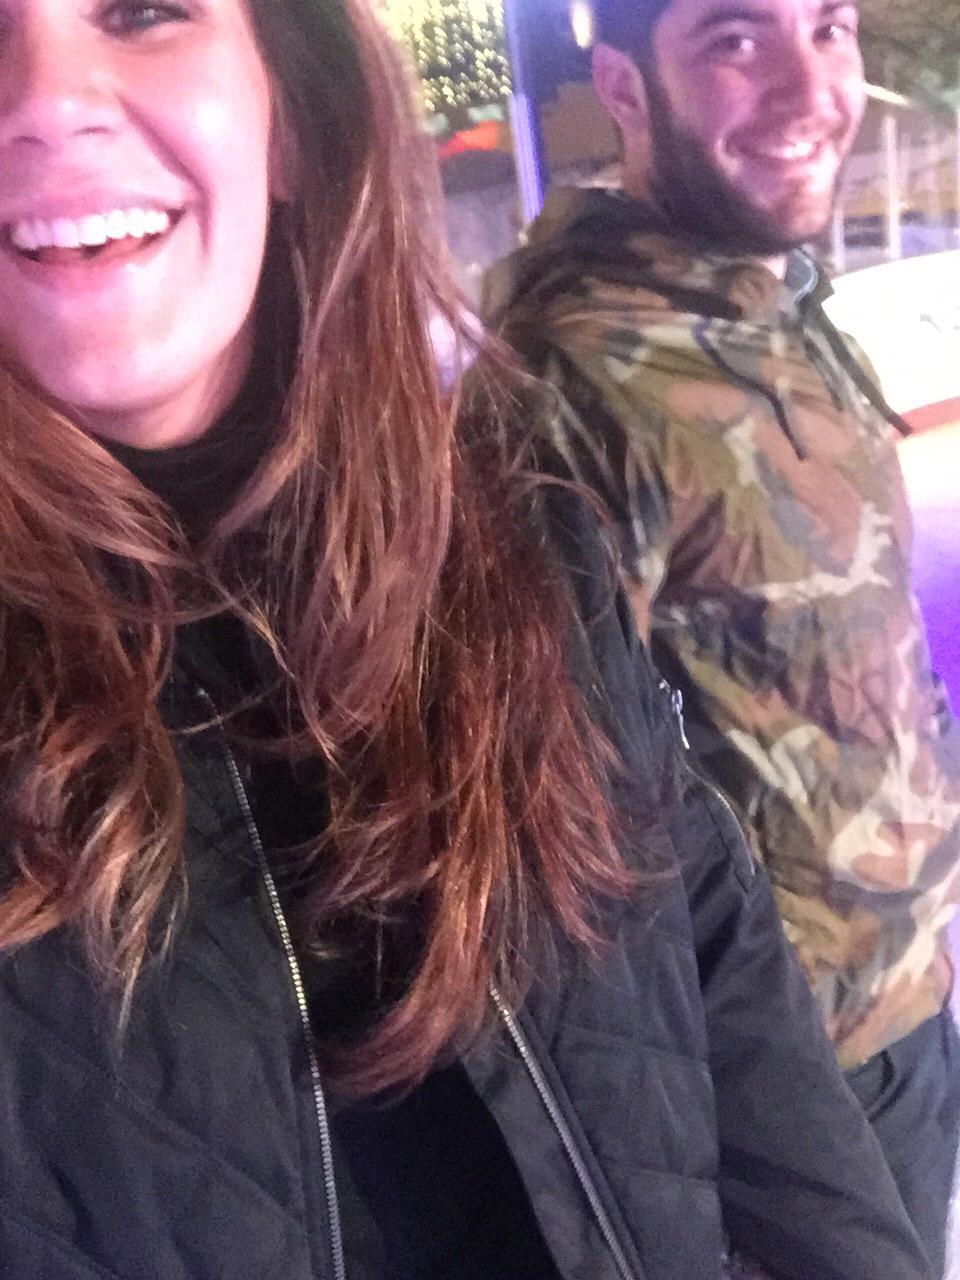 First selfie of us together -it was our third date and went ice skating!